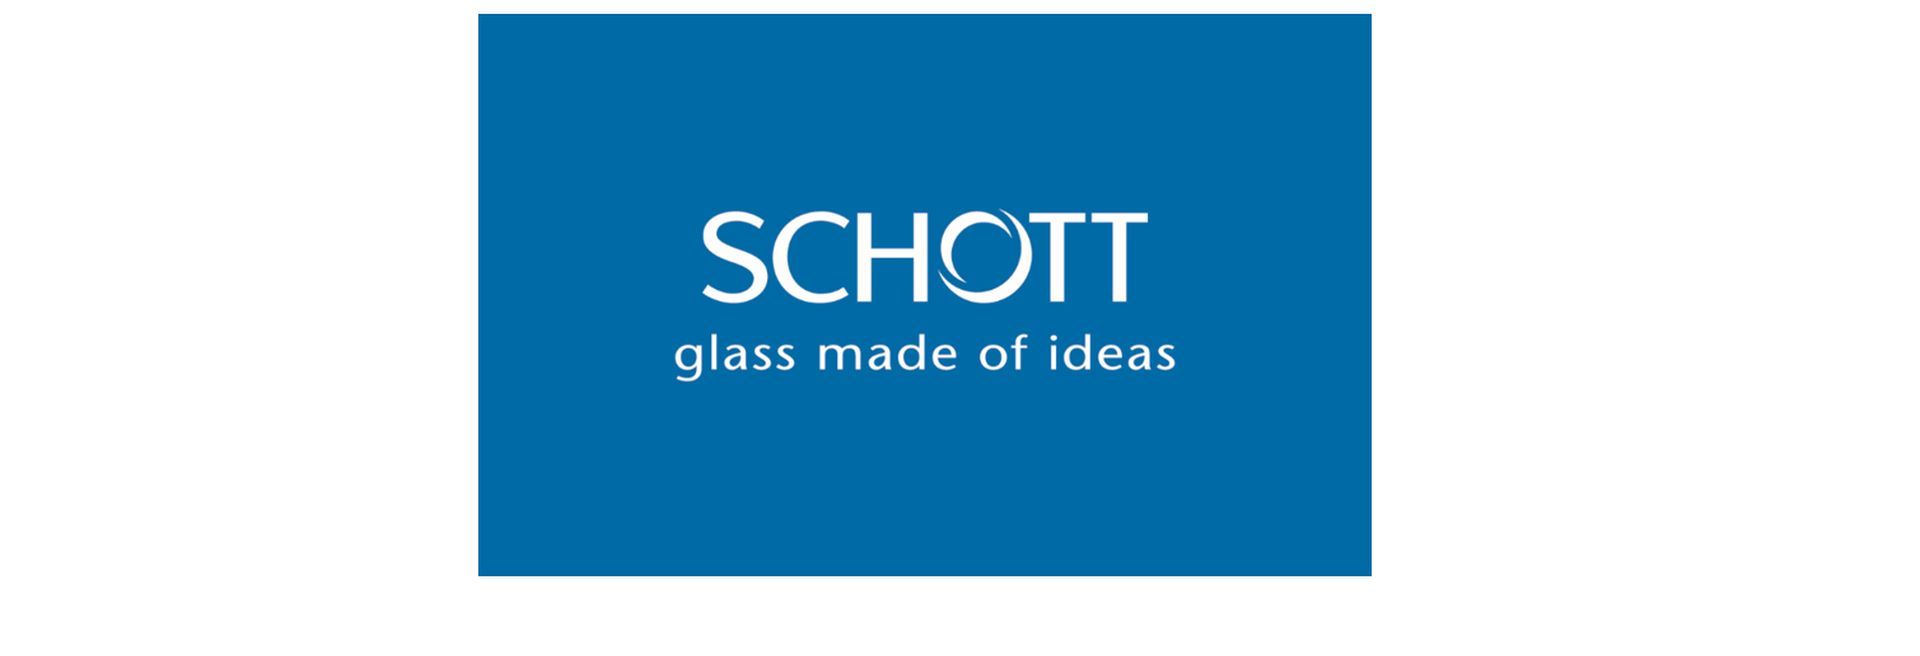 Schott’s State-of-the-art Prefillable Glass Syringe Plant is now up and Running